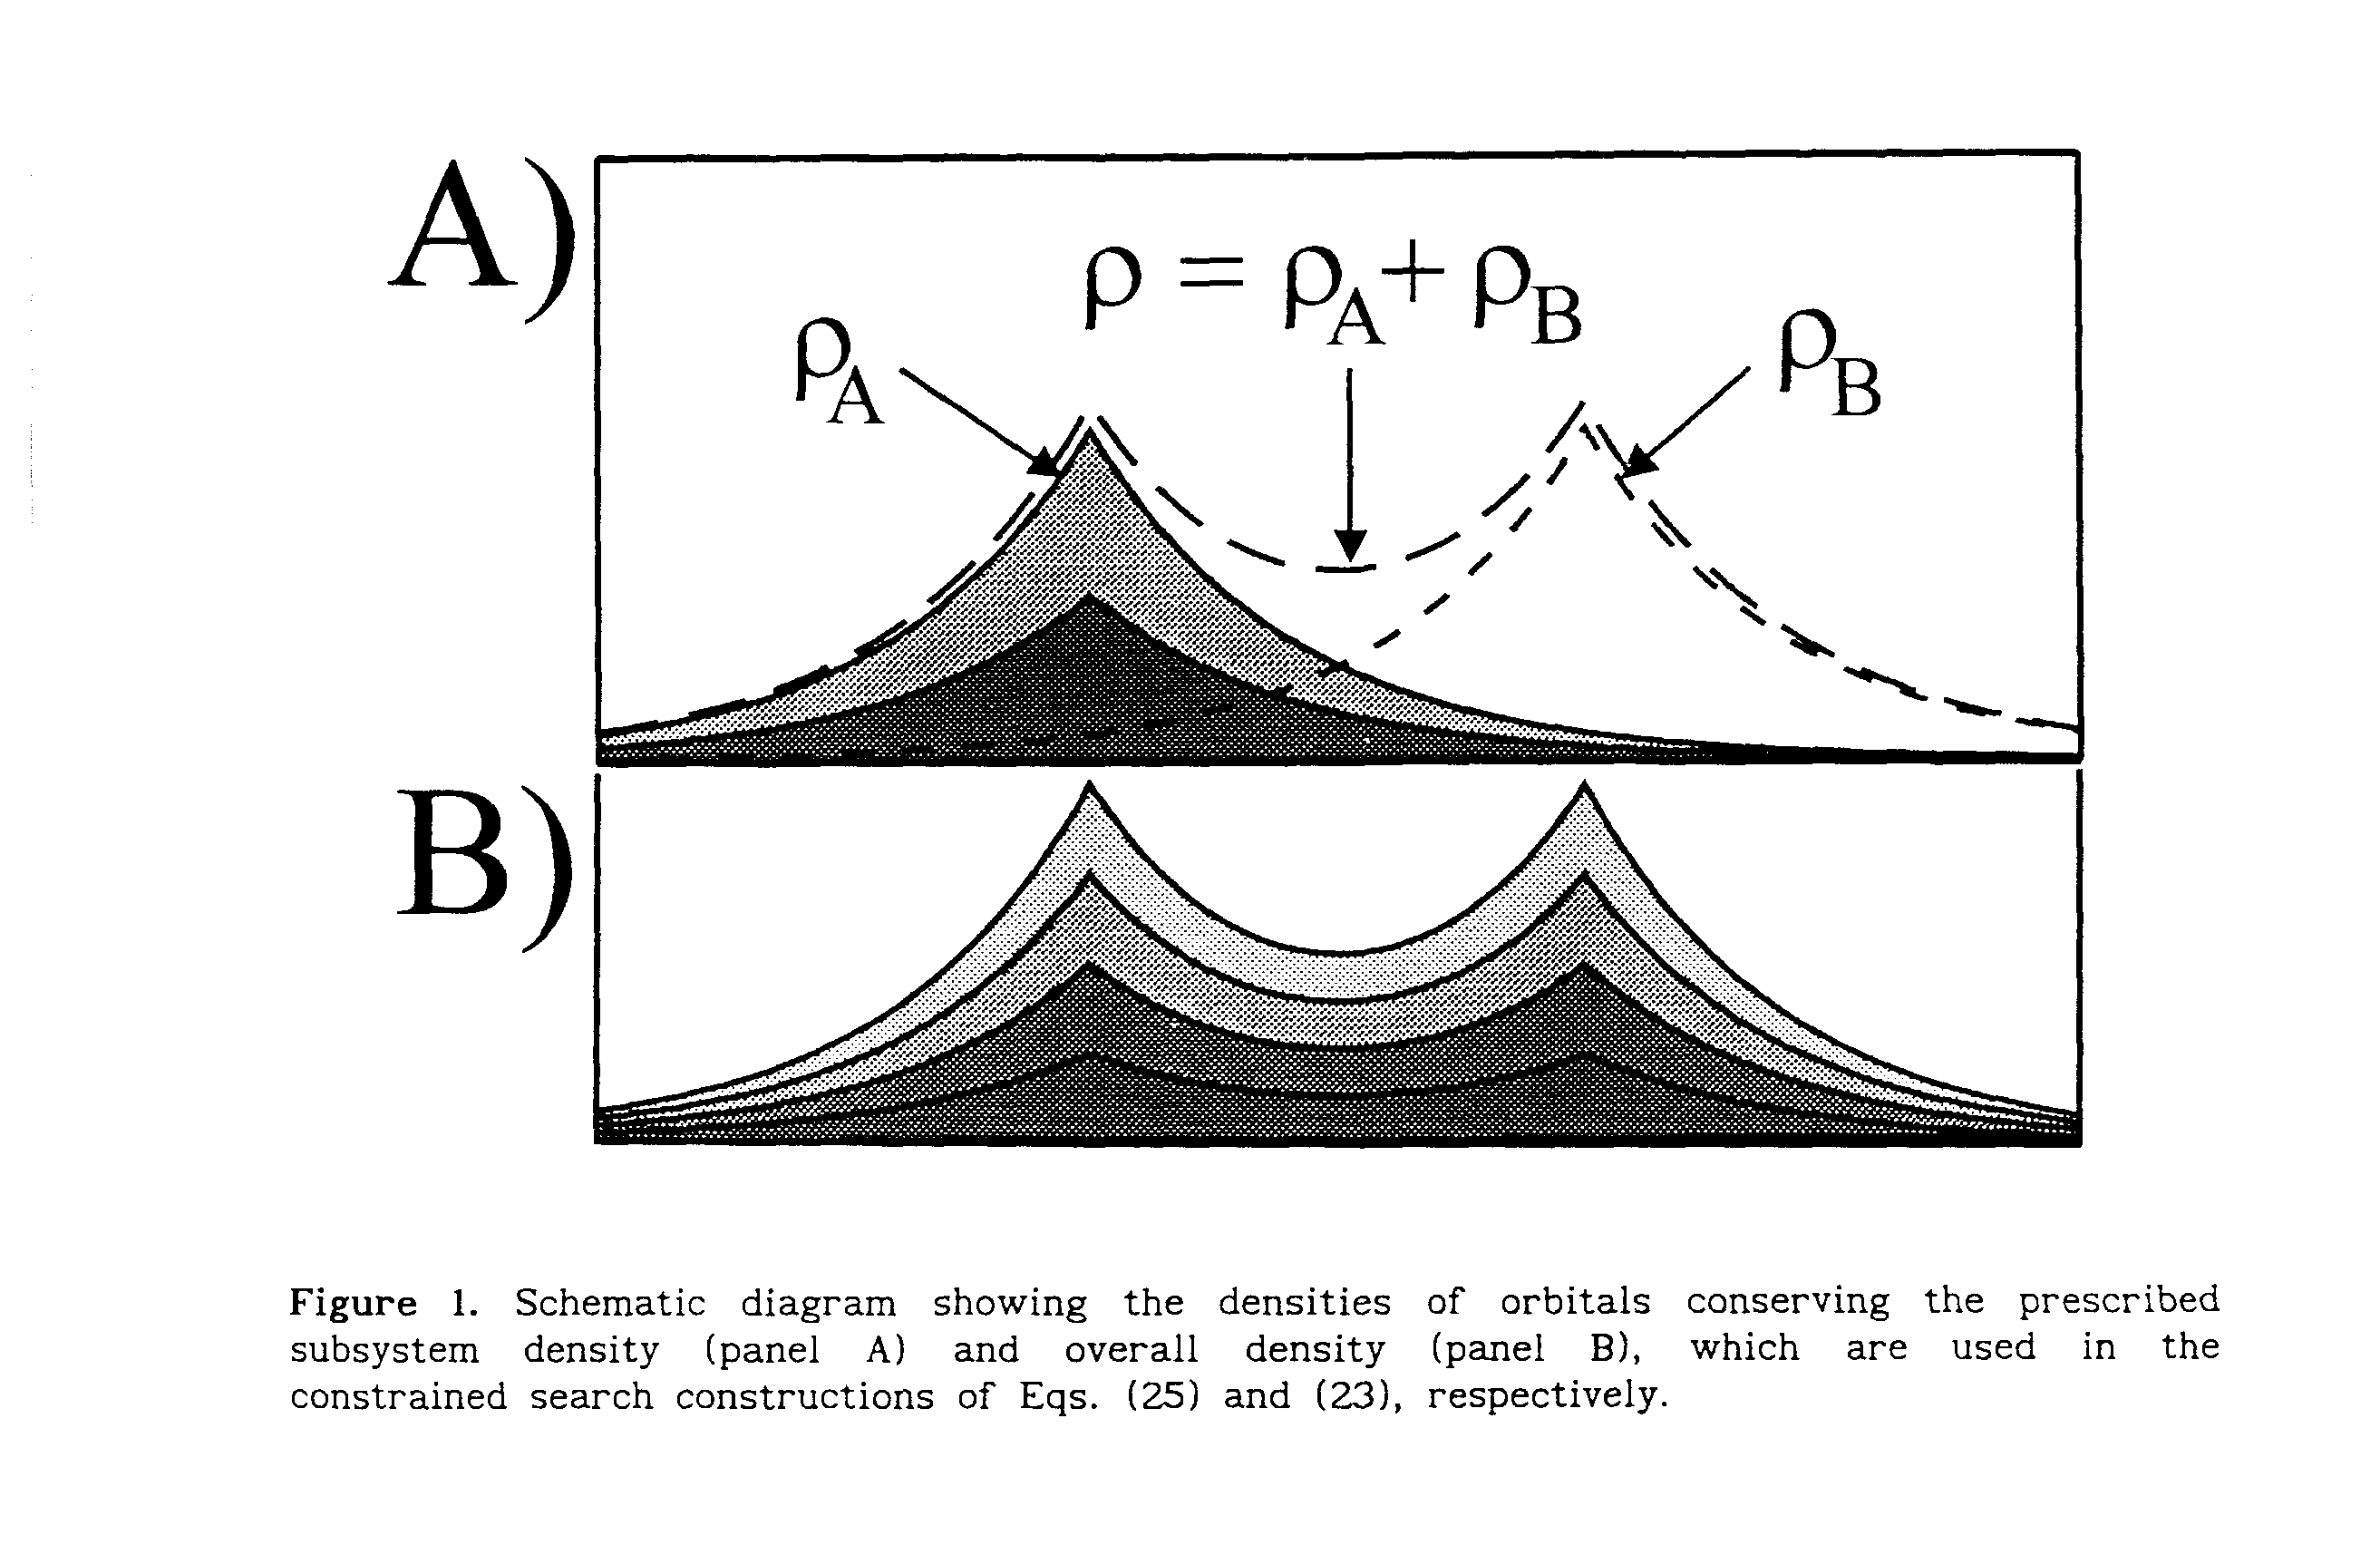 Figure 1. Schematic diagram showing the densities of orbitals conserving the prescribed subsystem density (panel A) and overall density (panel B), which are used in the constrained search constructions of Eqs. (25) and (23), respectively.